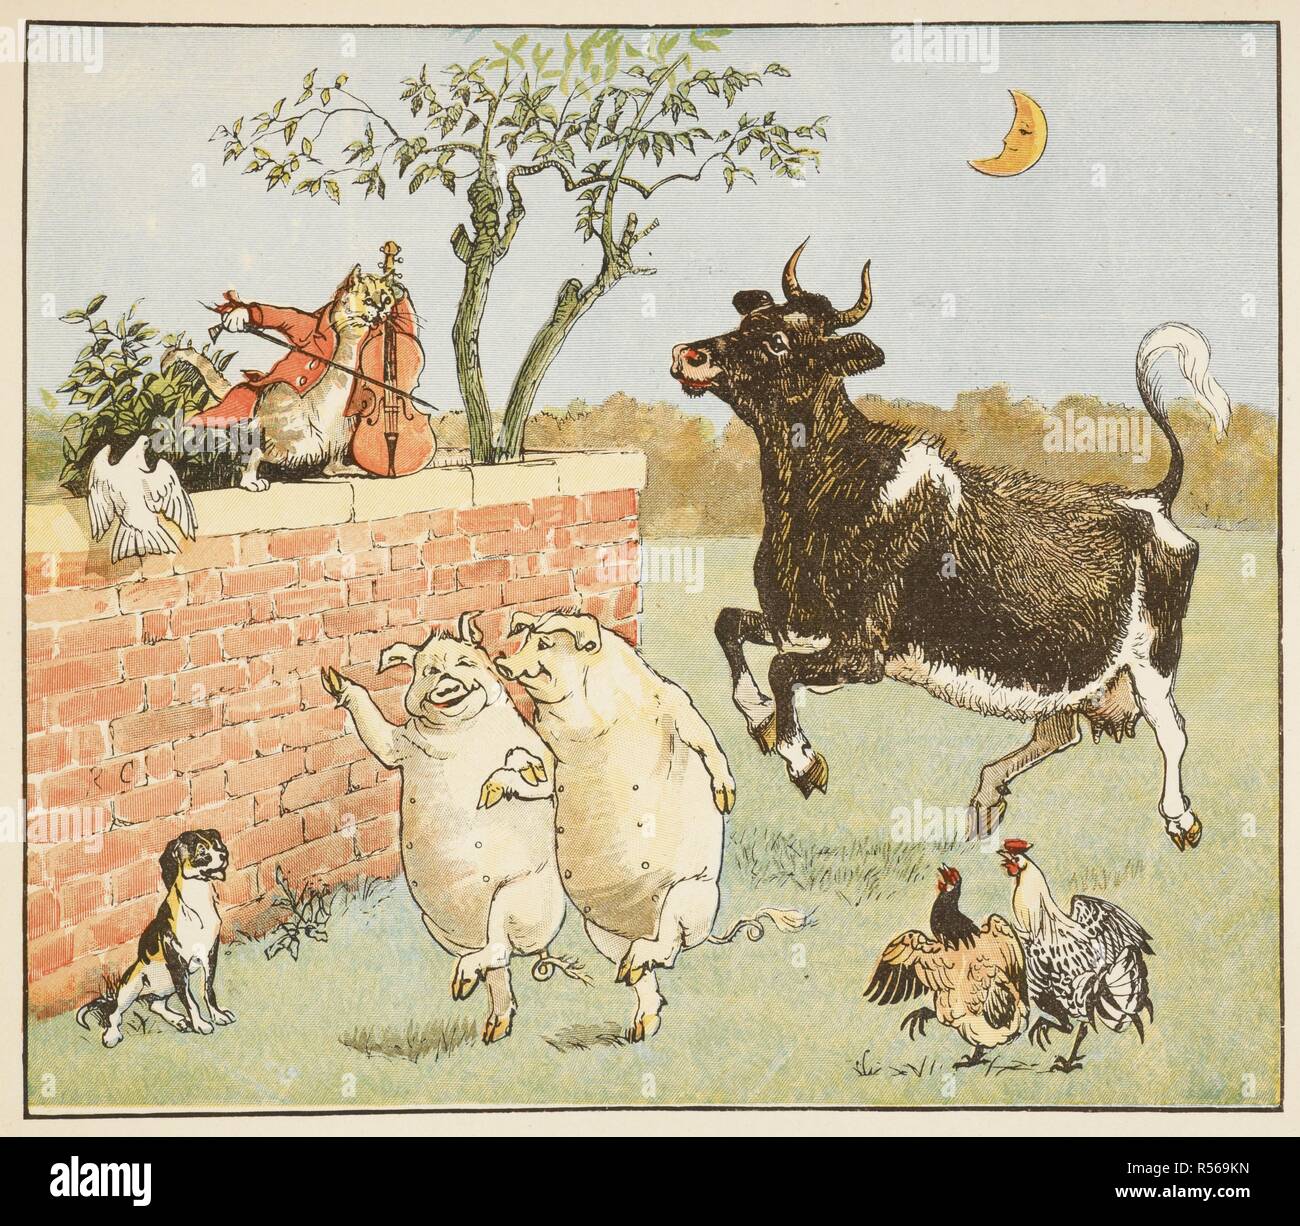 Farm animals dance to the cat playing a fiddle . The Hey Diddle Diddle Picture Book. London : G. Routledge & Sons, [1883]. Source: 12805.r.53, page 6. Author: Randolph Caldecott. Stock Photo